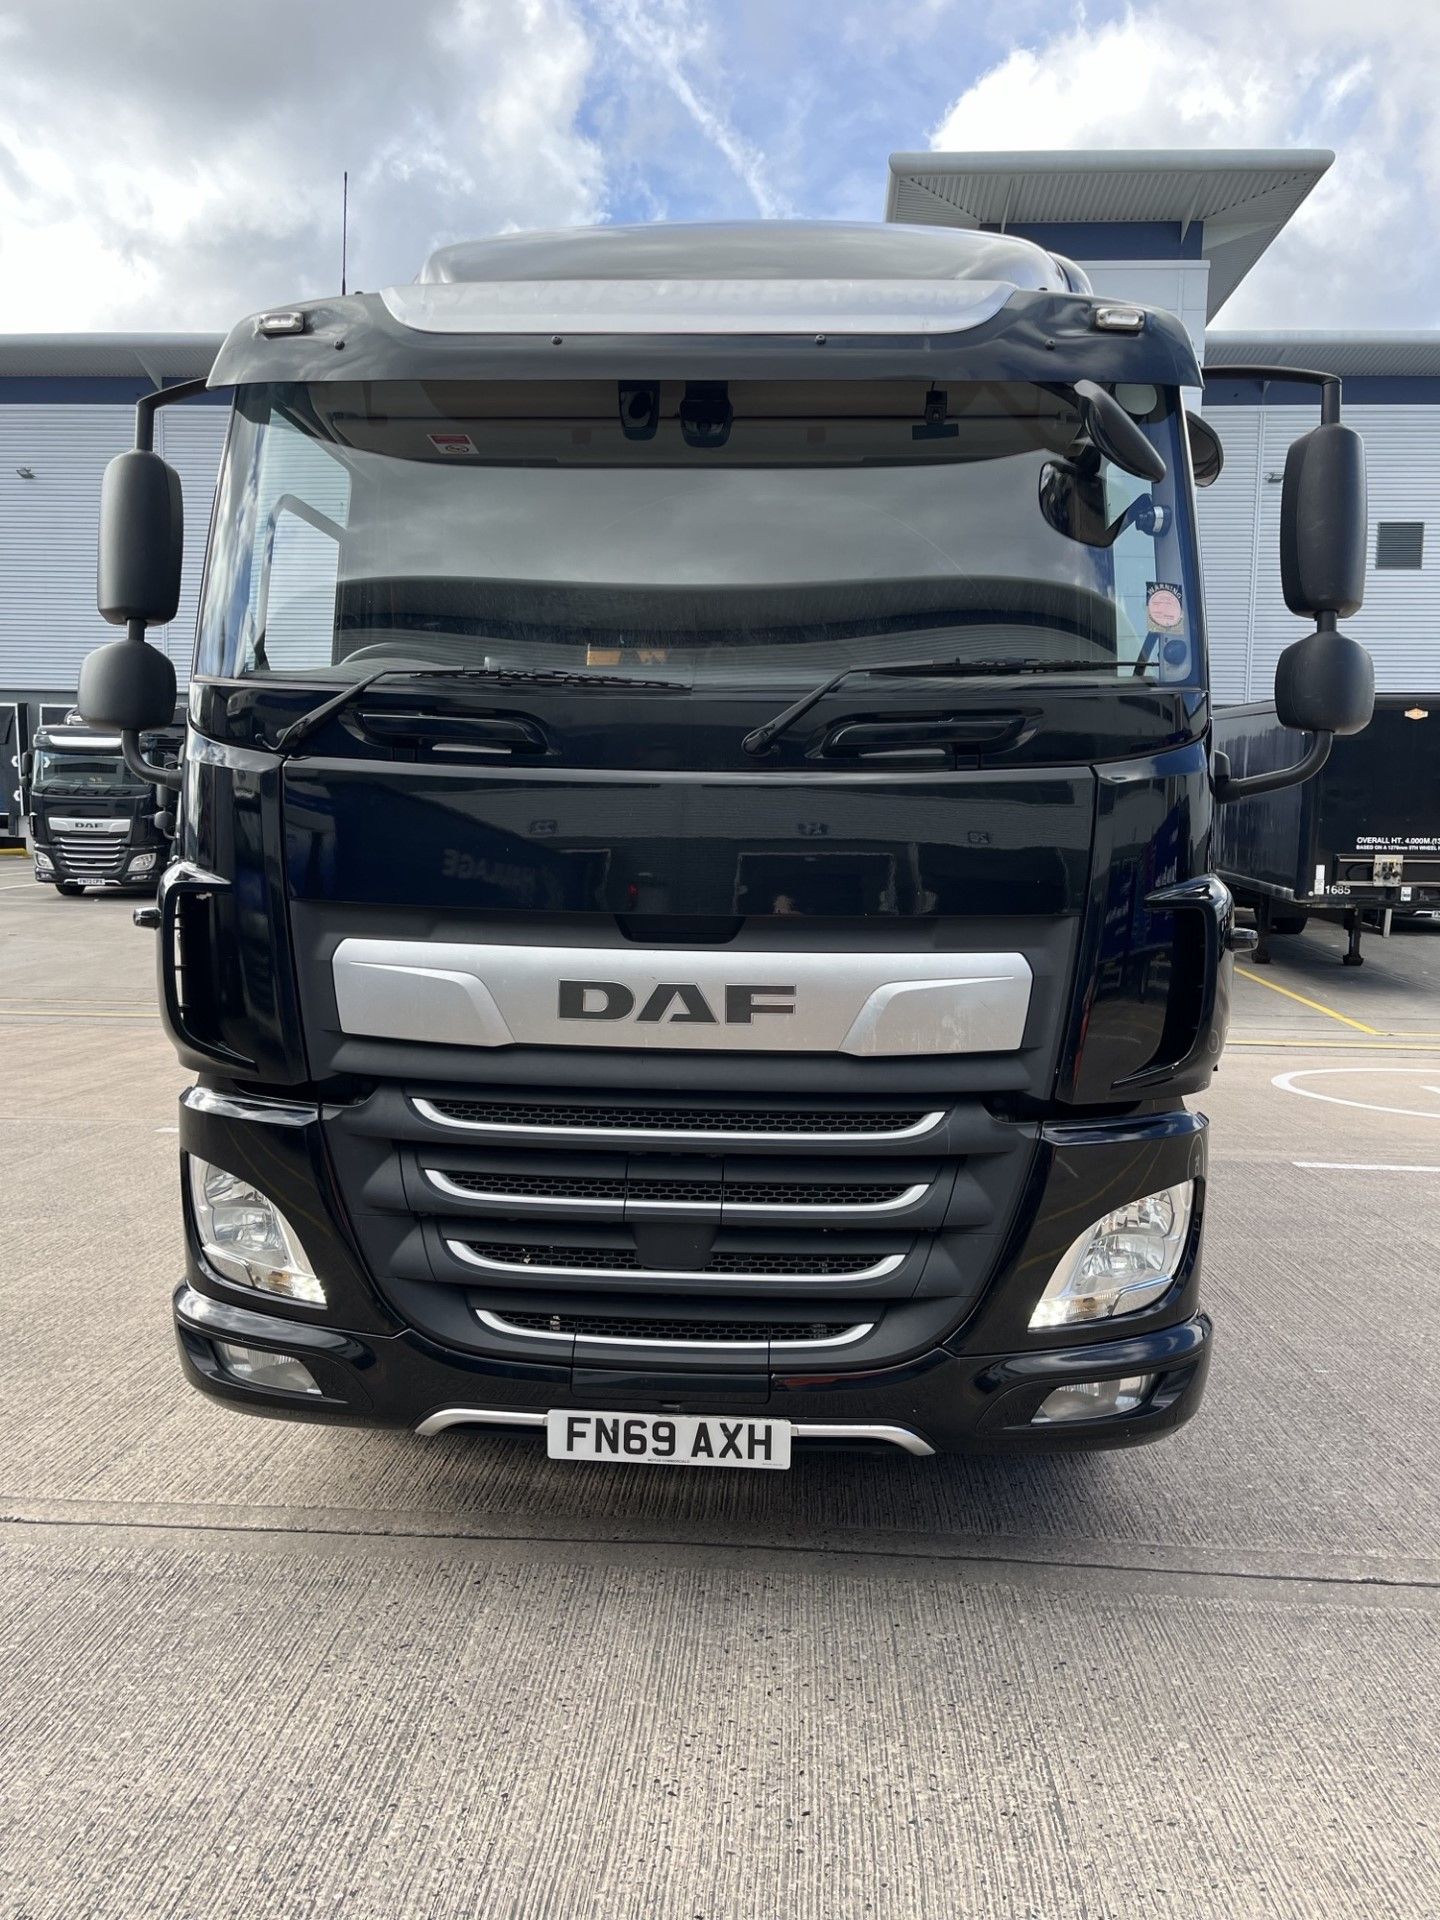 2019, DAF CF 260 FA (Ex-Fleet Owned & Maintained) - FN69 AXH (18 Ton Rigid Truck with Tail Lift) - Bild 3 aus 14